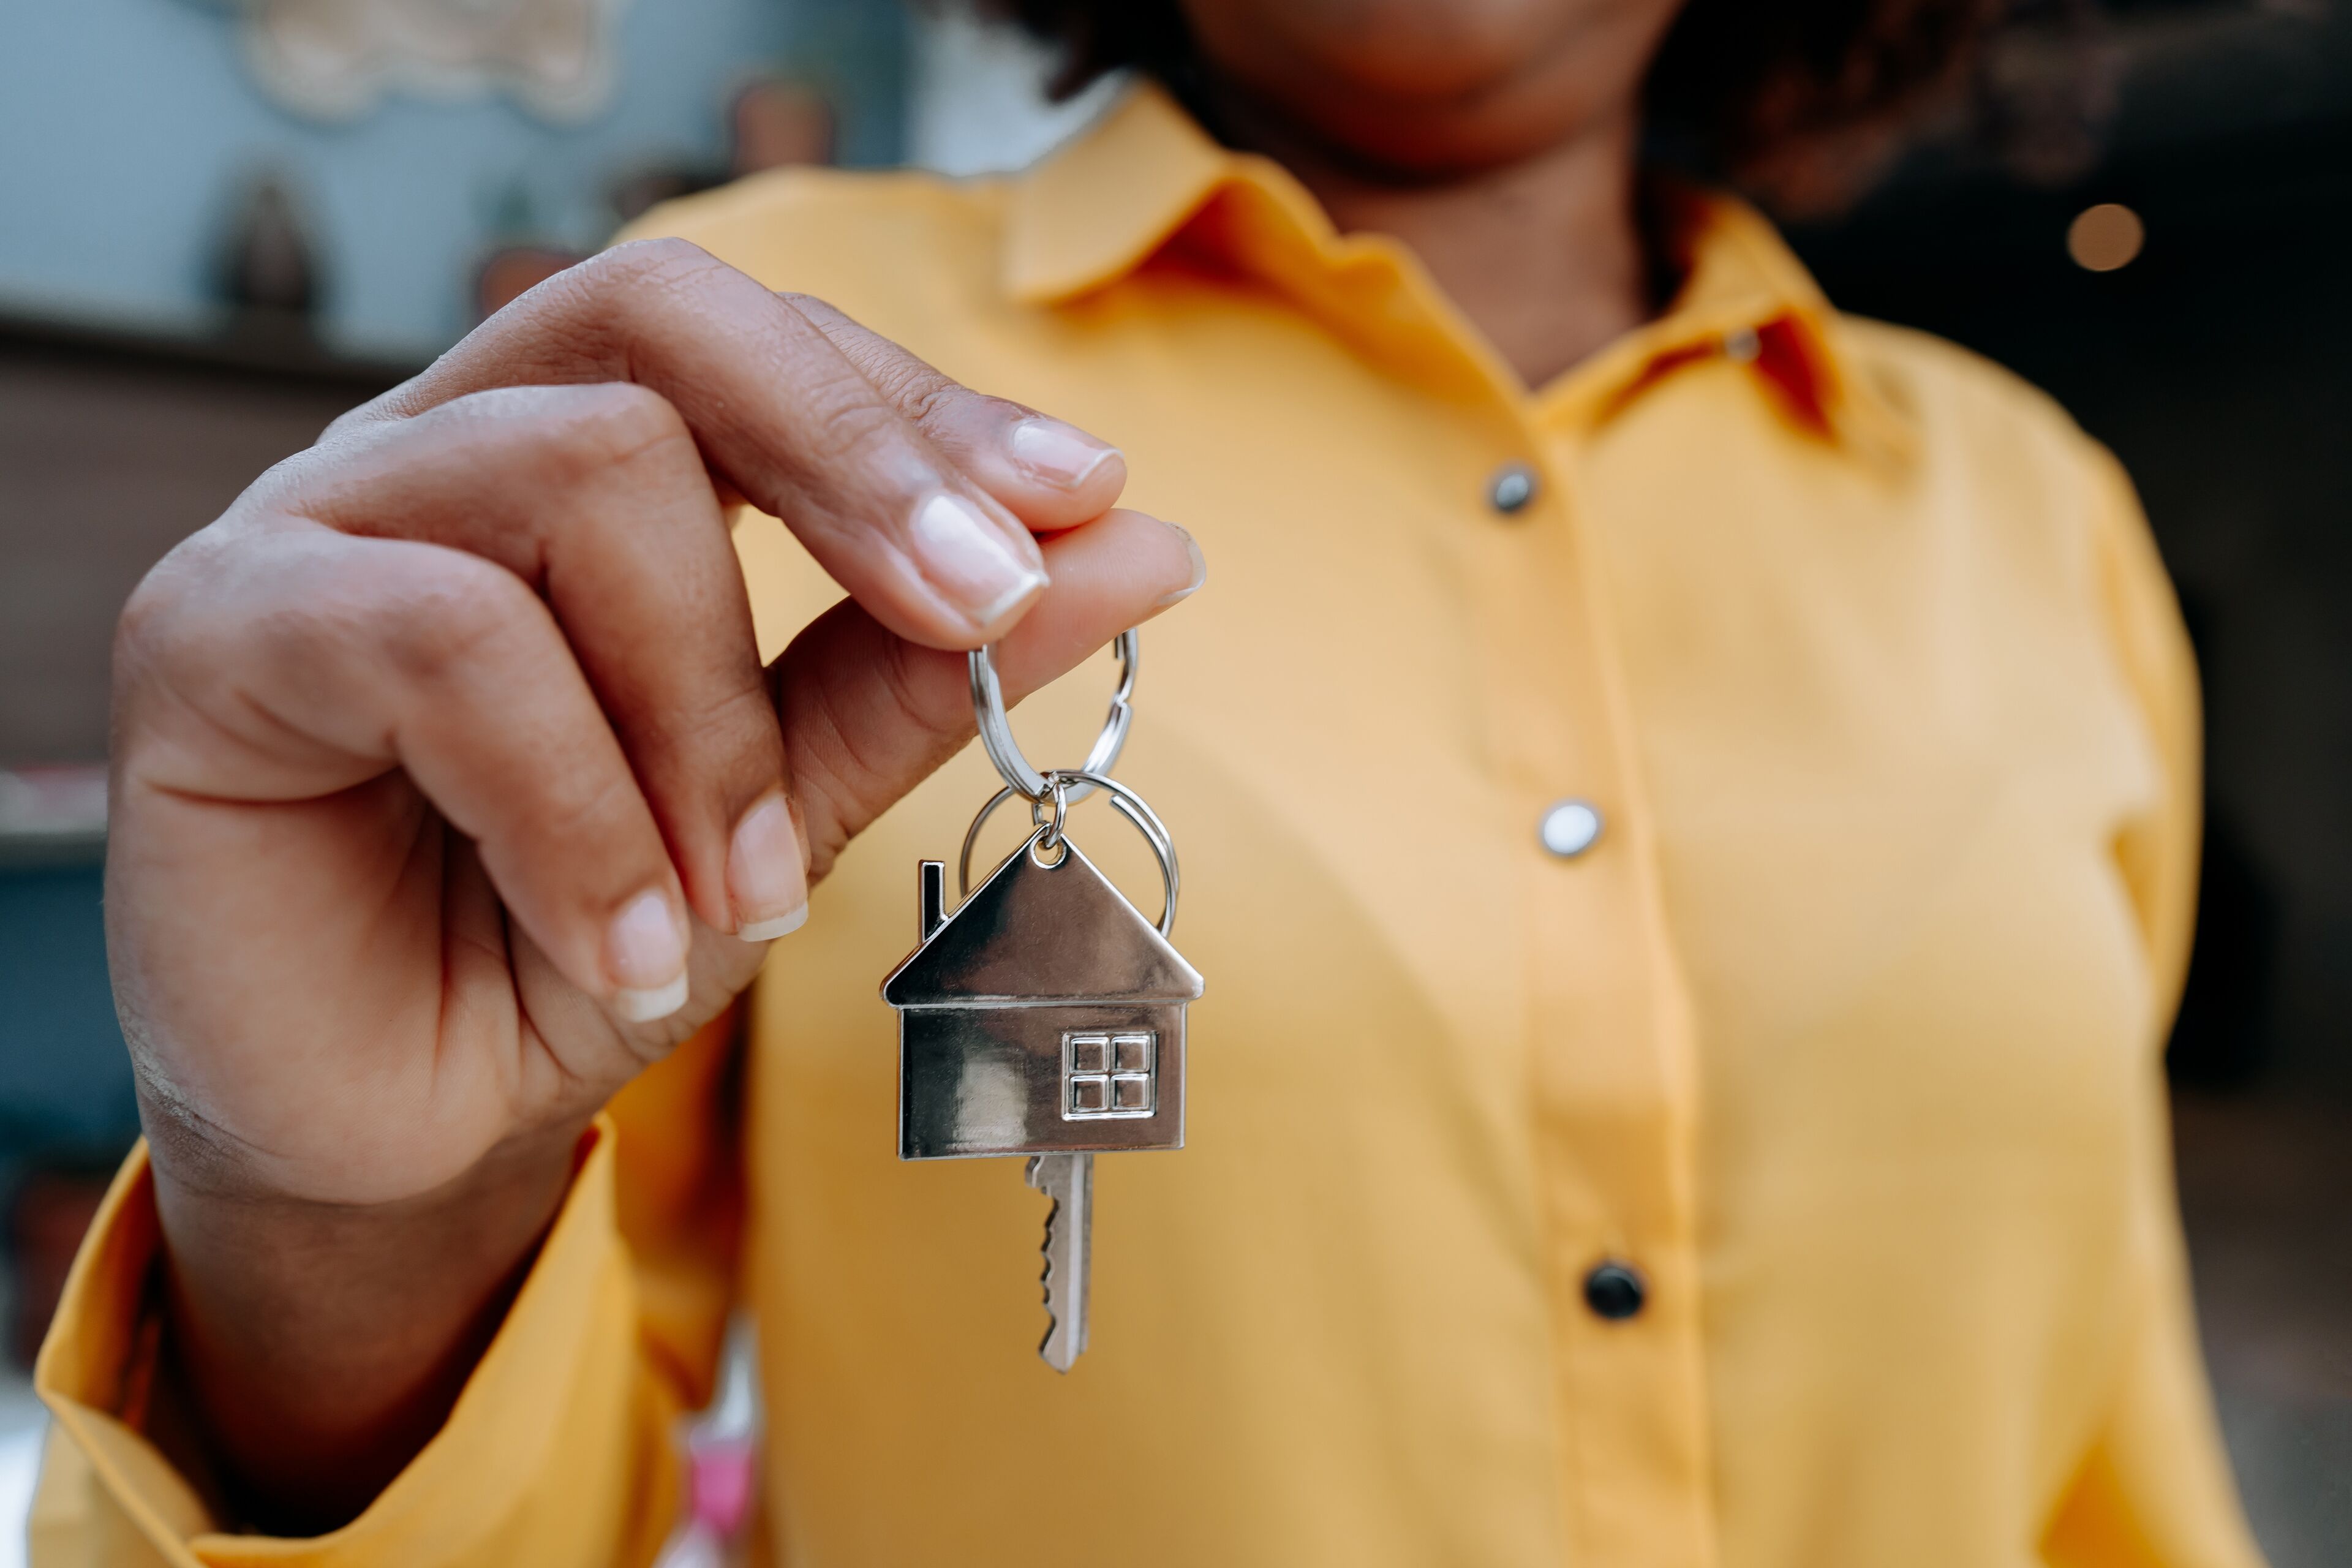 A close-up of a person's hand presenting a key with a house-shaped keychain, symbolizing new homeownership.